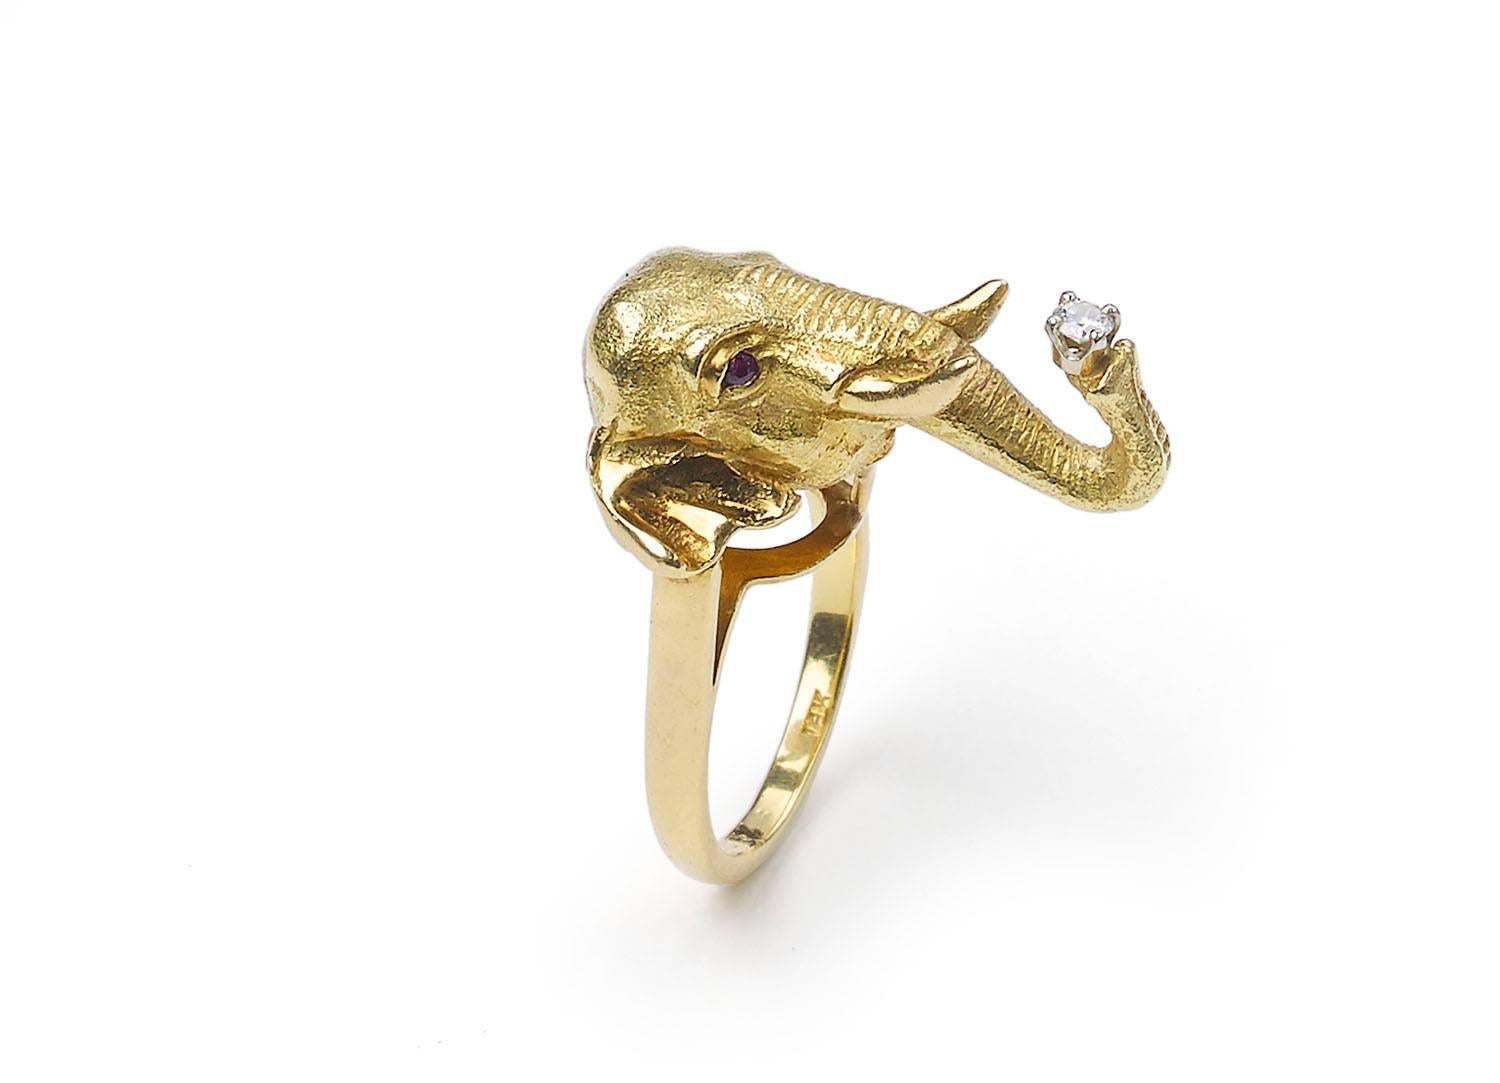 A gold elephant head ring, with ruby eyes and a round brilliant-cut diamond in the trunk. Circa 1990. Numbered 4037 stamped 18k. Finger size K½ UK, 5½ USA